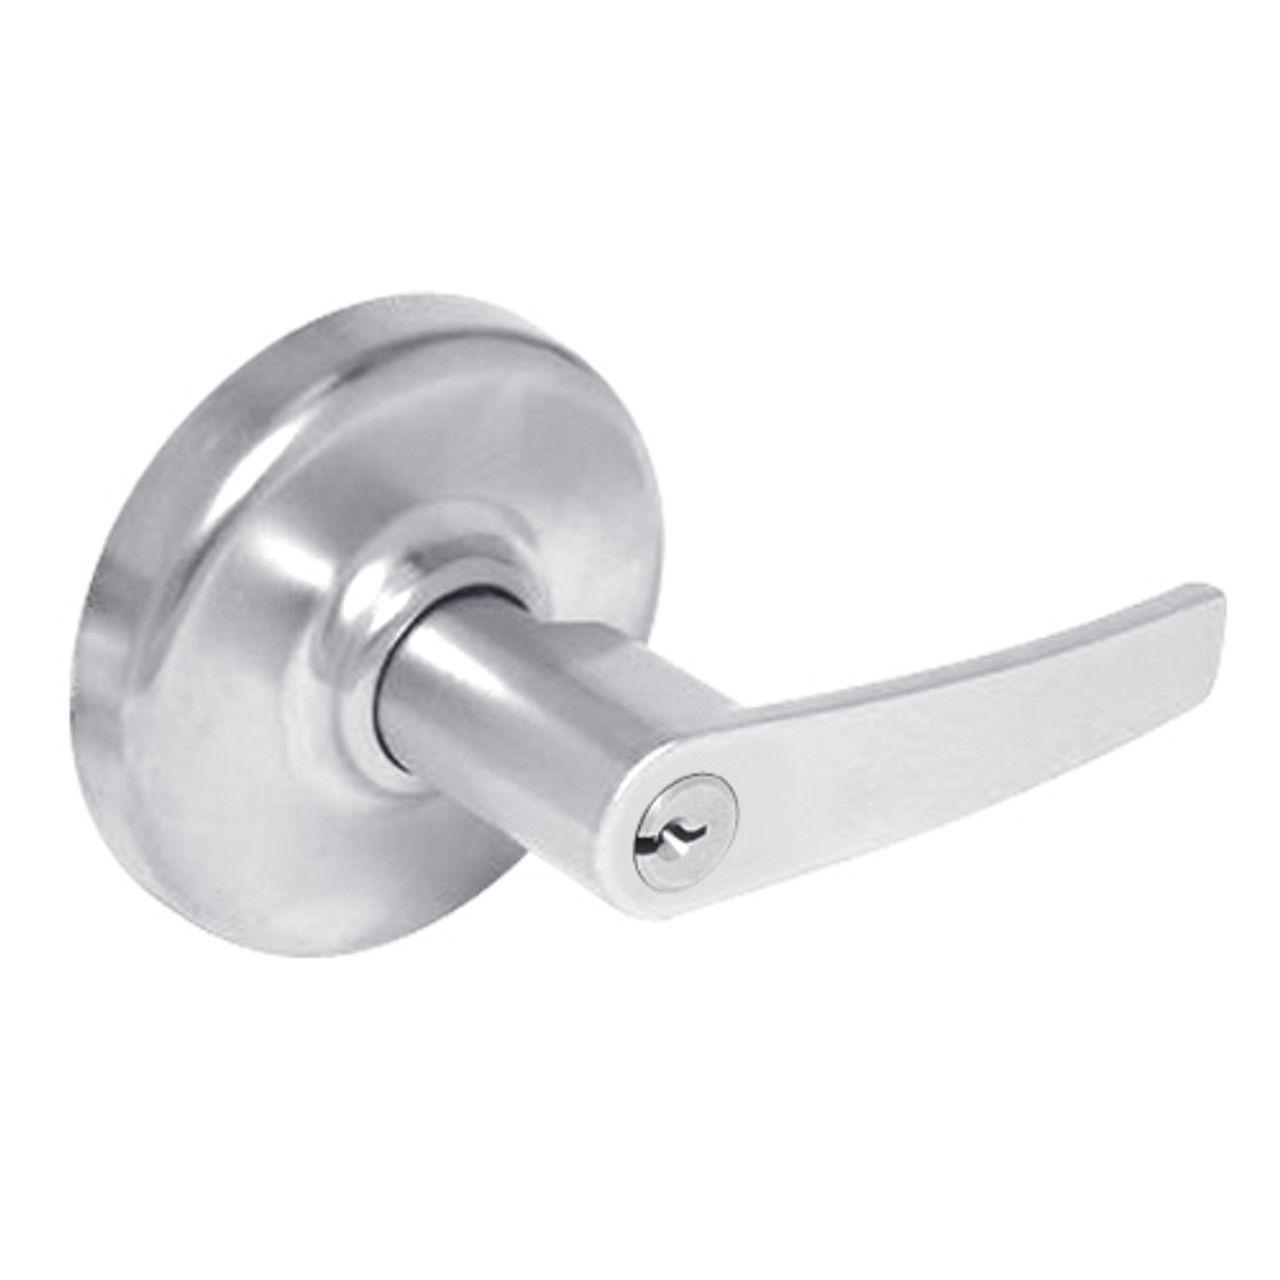 CL3361-AZD-625 Corbin CL3300 Series Extra Heavy Duty Entry or Office Cylindrical Locksets with Armstrong Lever in Bright Chrome Finish